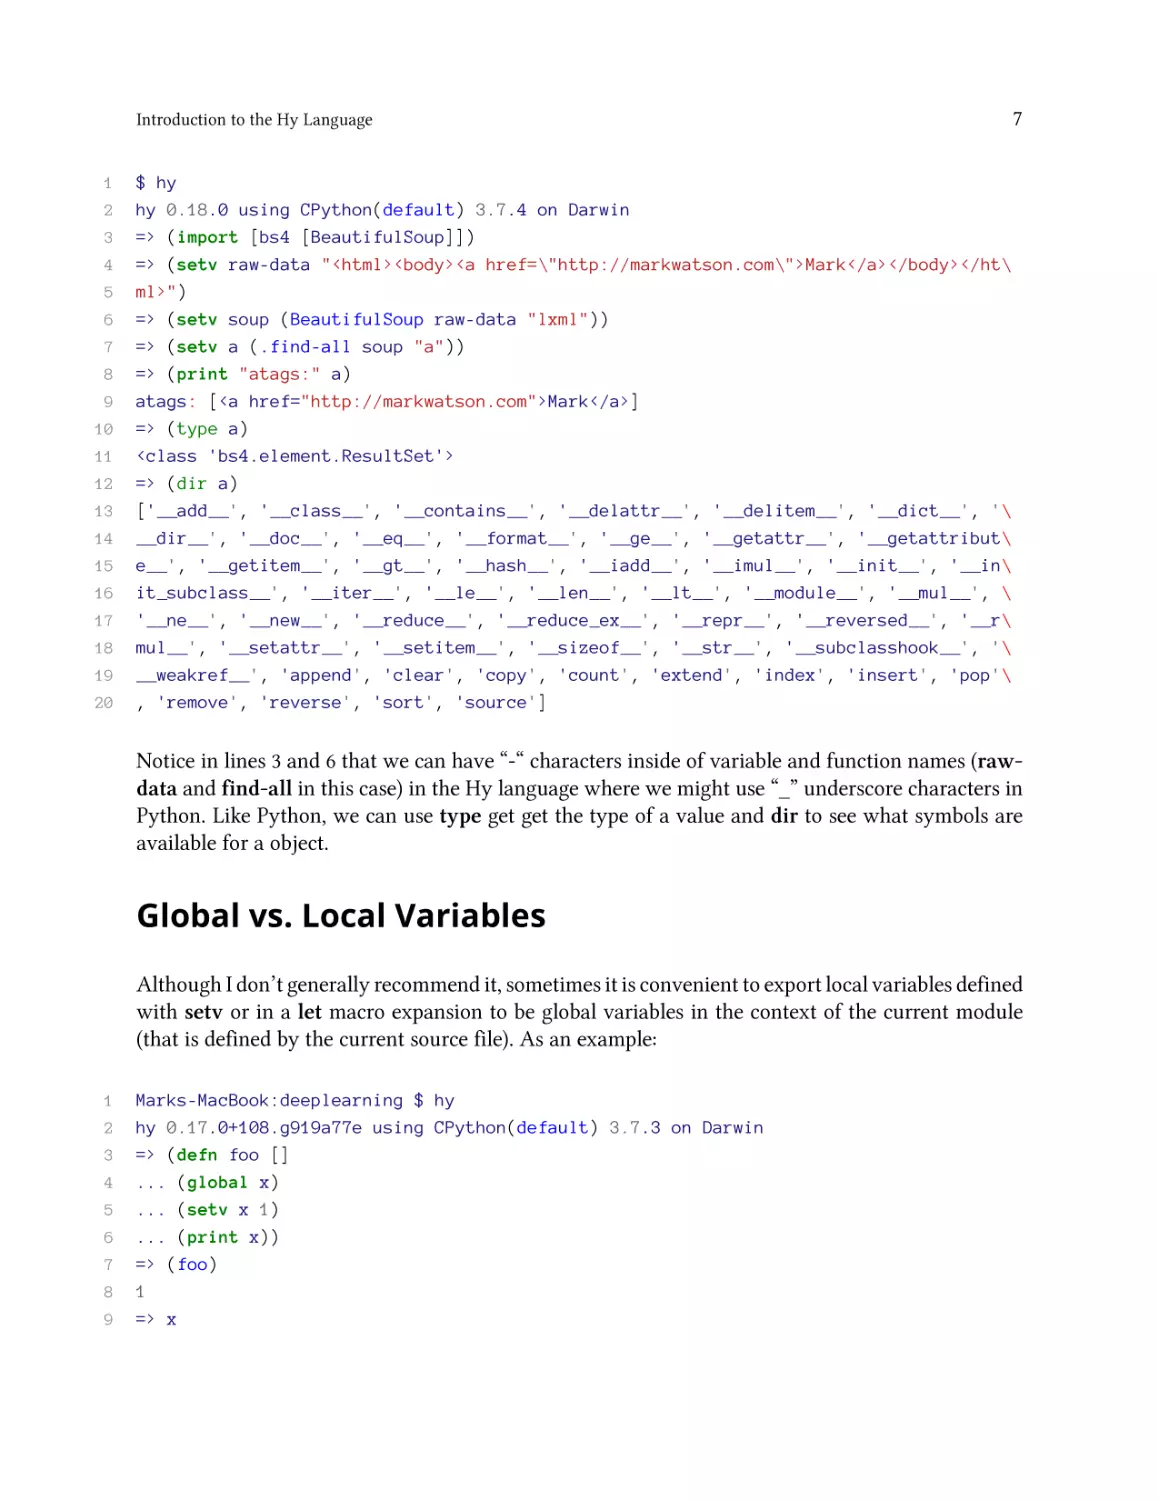 Global vs. Local Variables